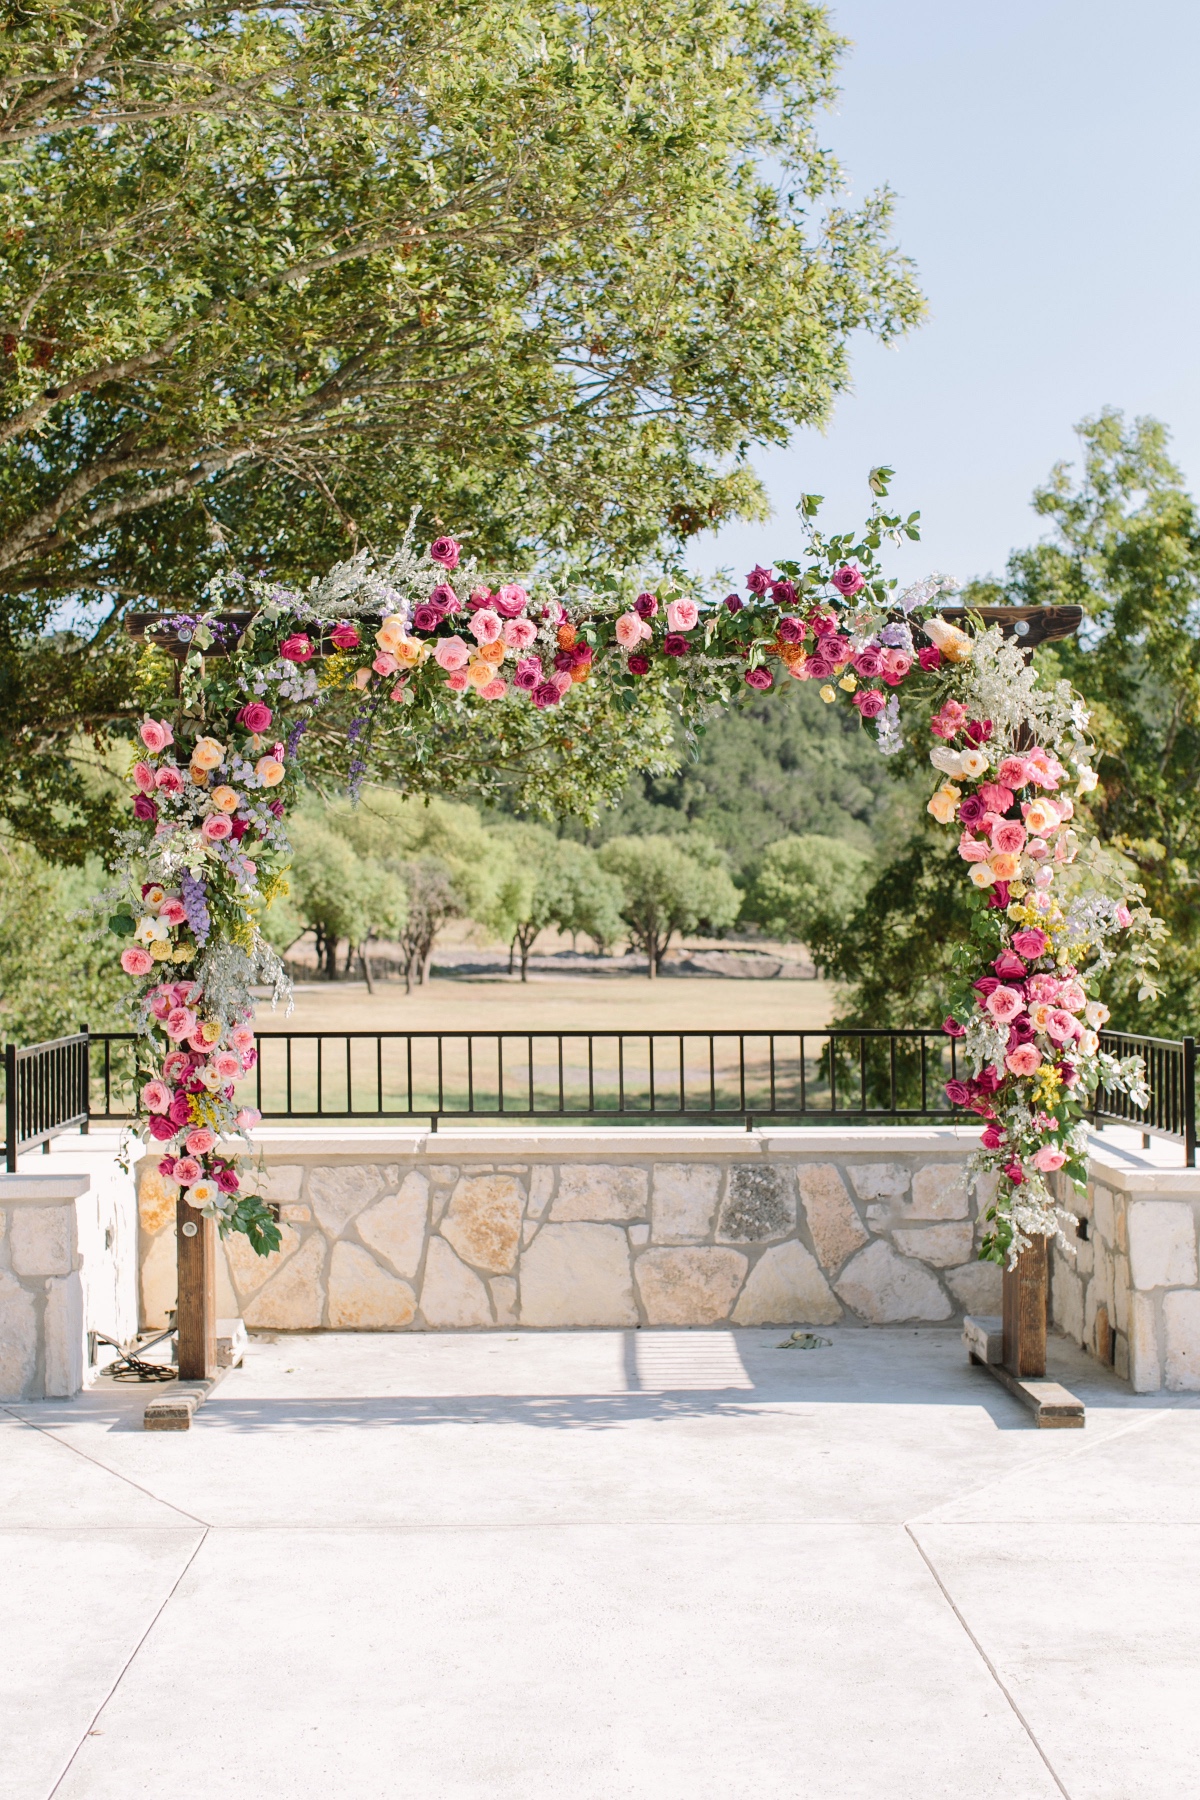 How To Have A Lavish Ranch Wedding With Bold Florals + Blue Bridesmaids